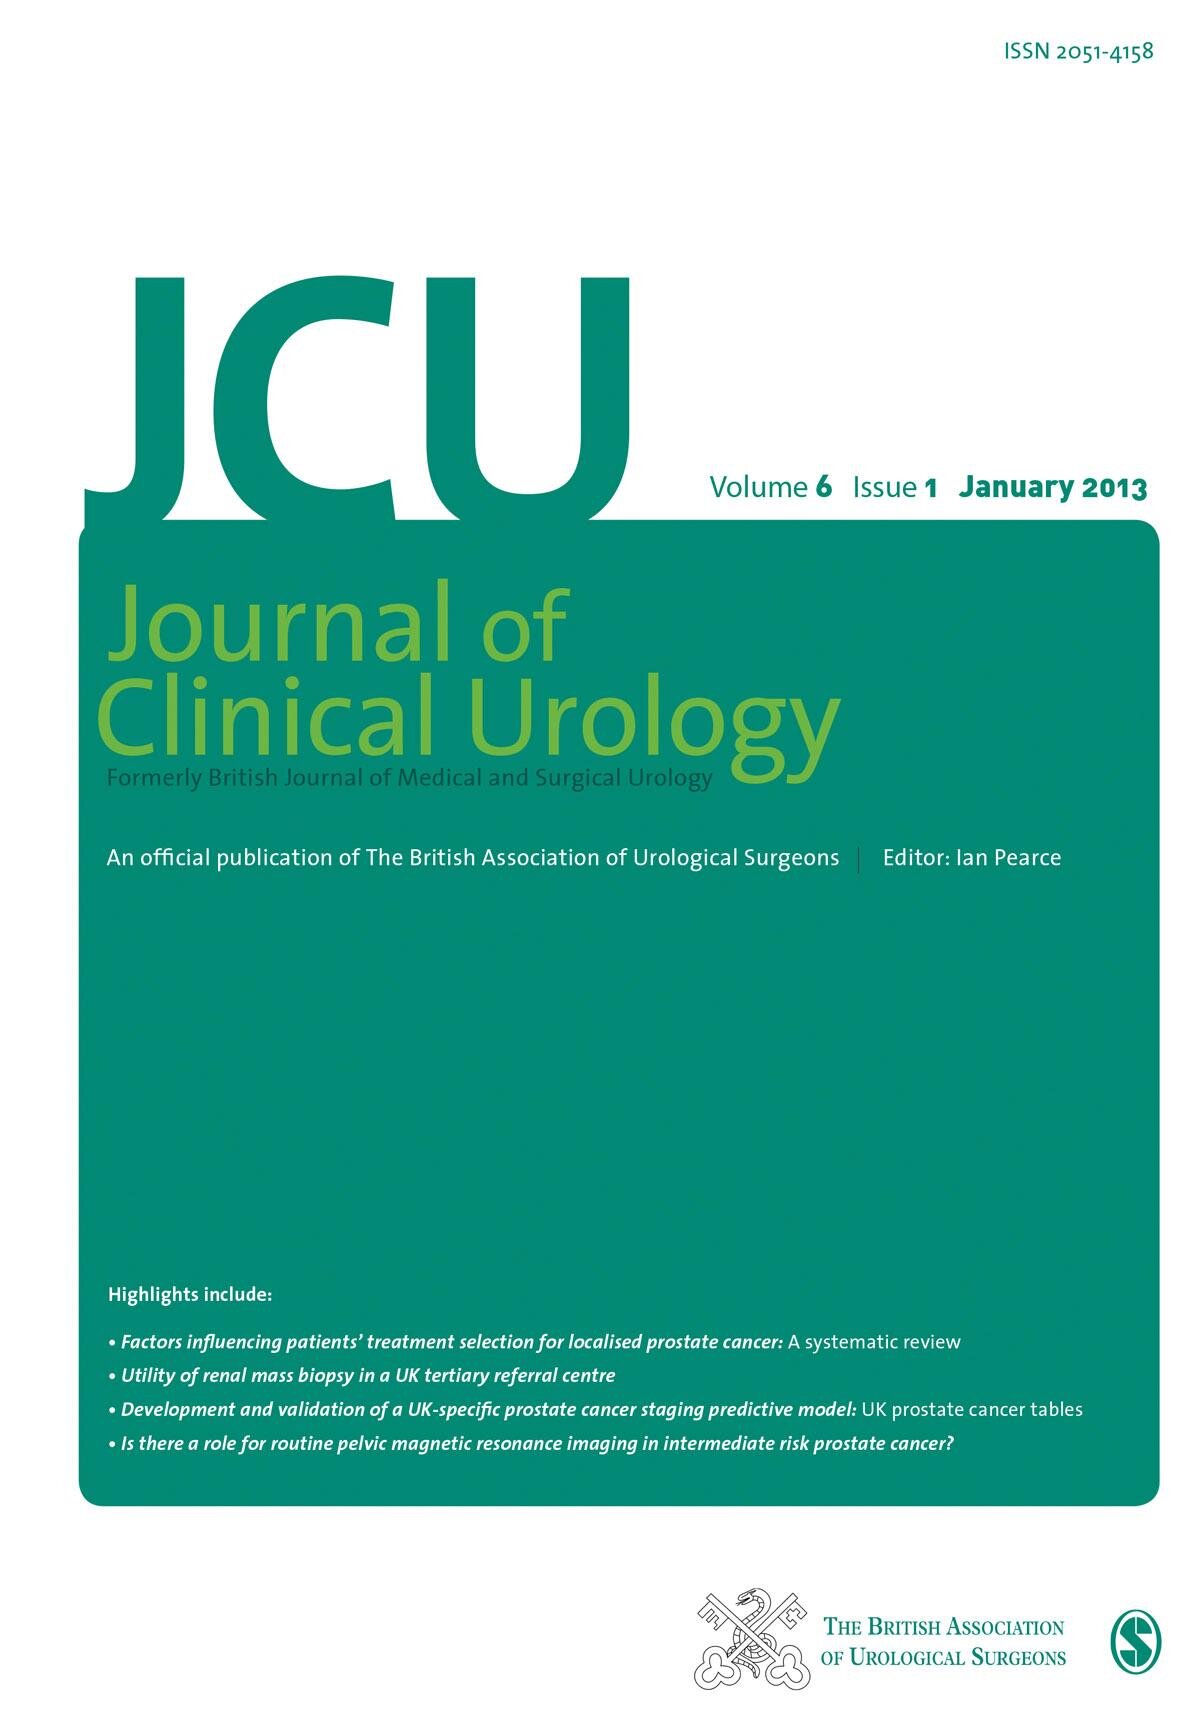 Journal of Clinical Urology | Clinically orientated Journal of Urology | Publication of @BAUSurology | Editor @endouro |